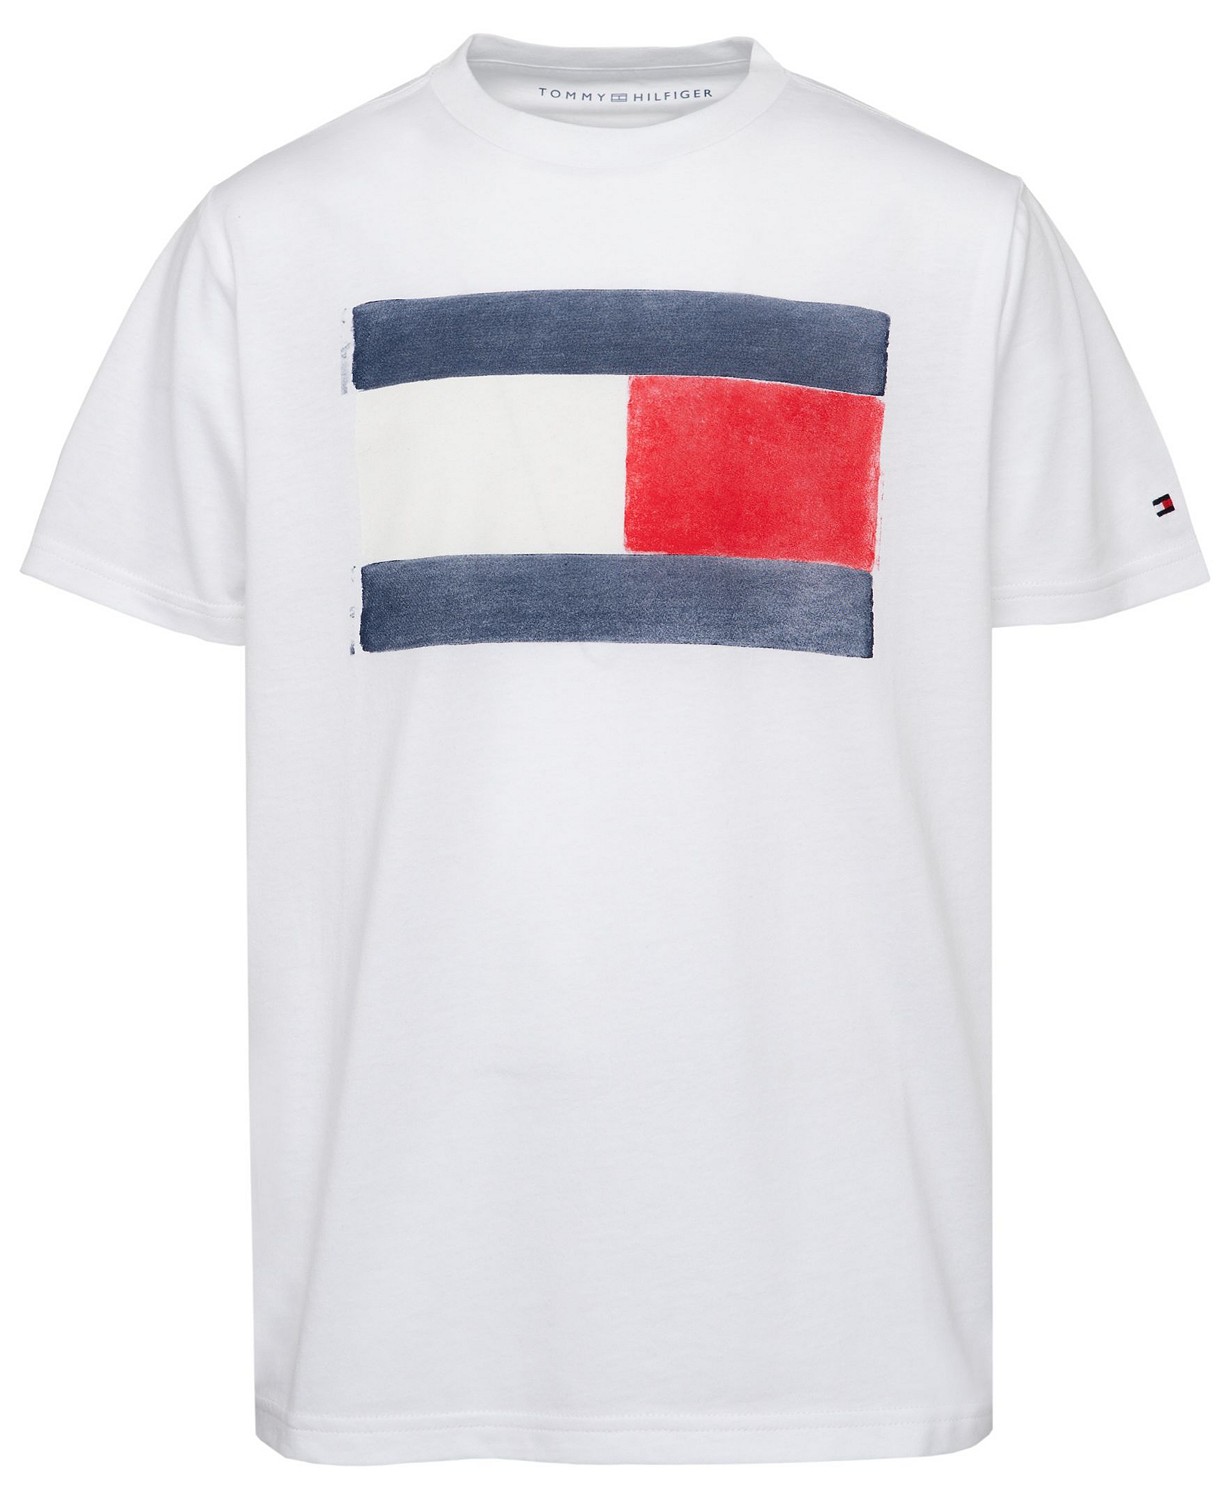 Little Boys Tommy Flag Graphic-Print T-Shirt